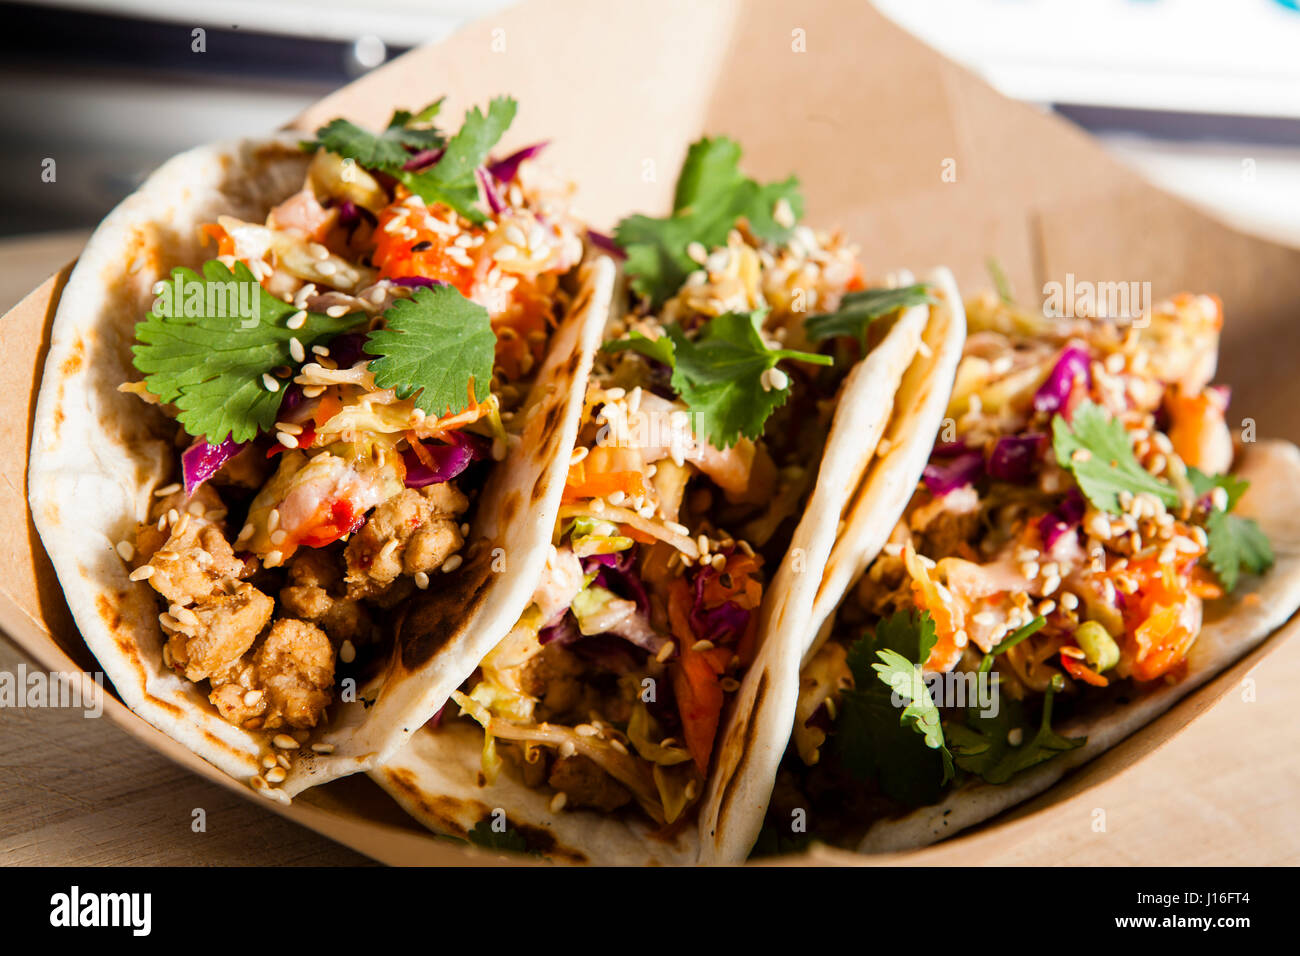 Tacos From The Umami Food Truck Stock Photo